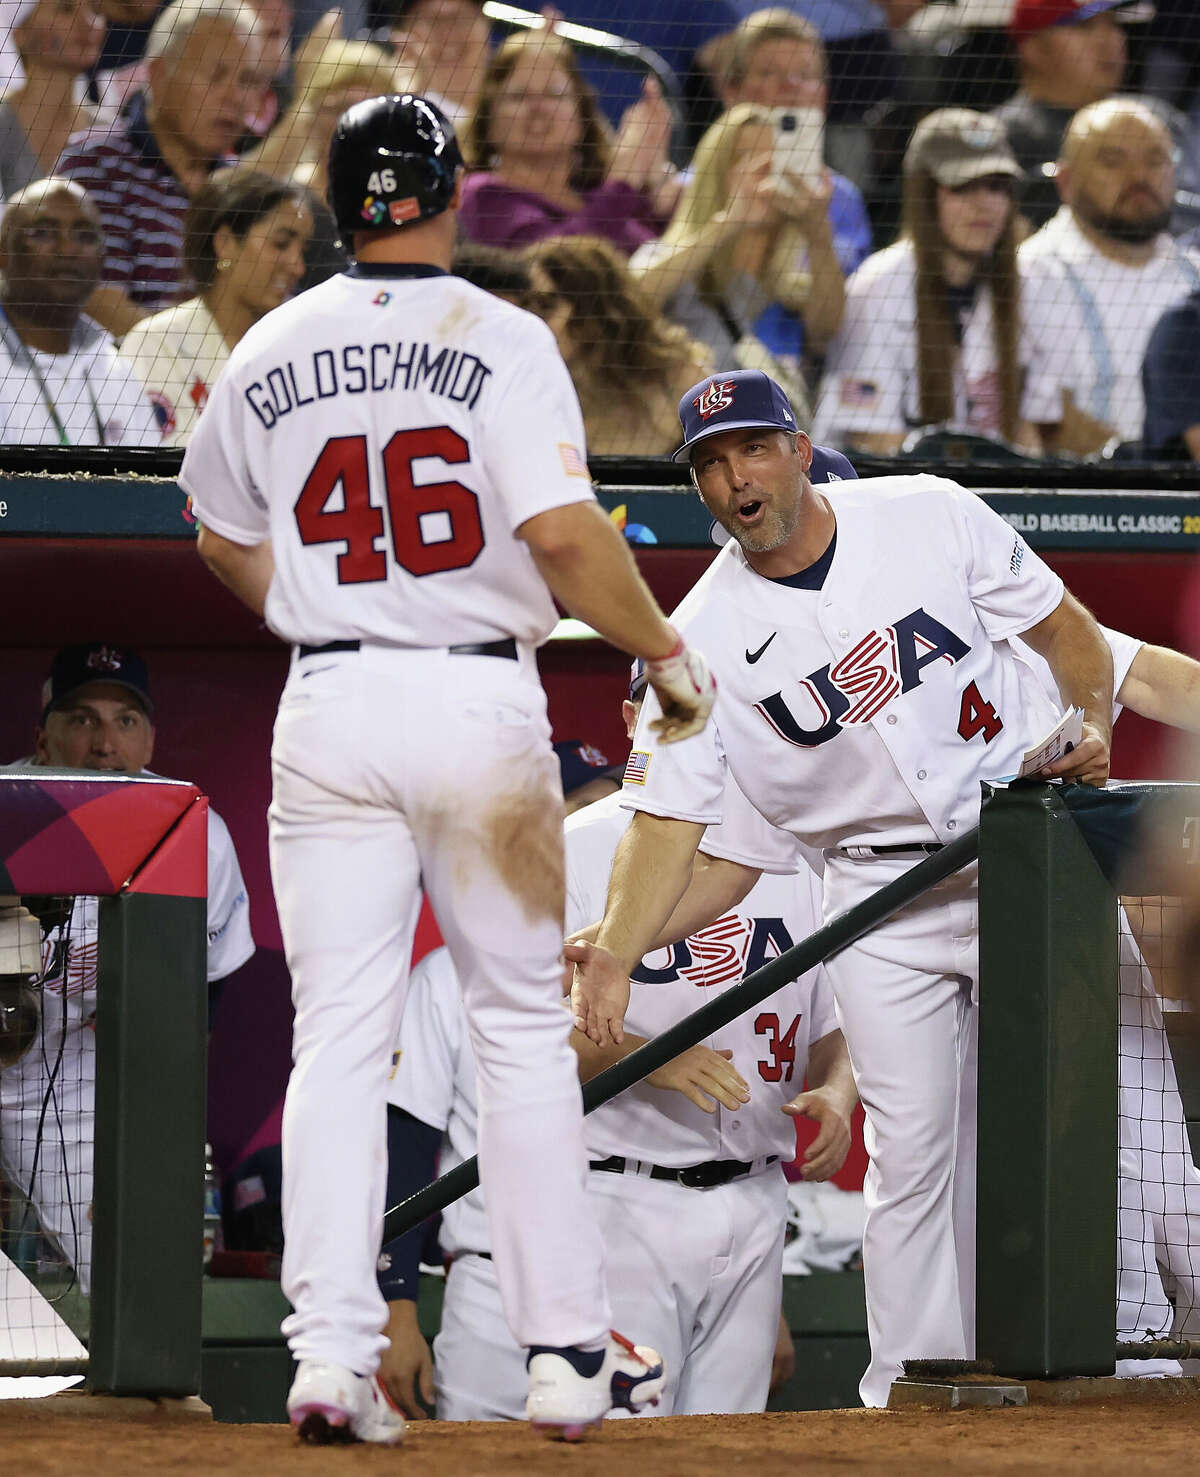 Manager Mark DeRosa #4 of Team USA congratulates Paul Goldschmidt #46 after scoring a run against Team Great Britain during the fourth inning of the World Baseball Classic Pool C game at Chase Field on March 11, 2023 in Phoenix, Arizona. Team USA defeated Team Great Britain 6-2.